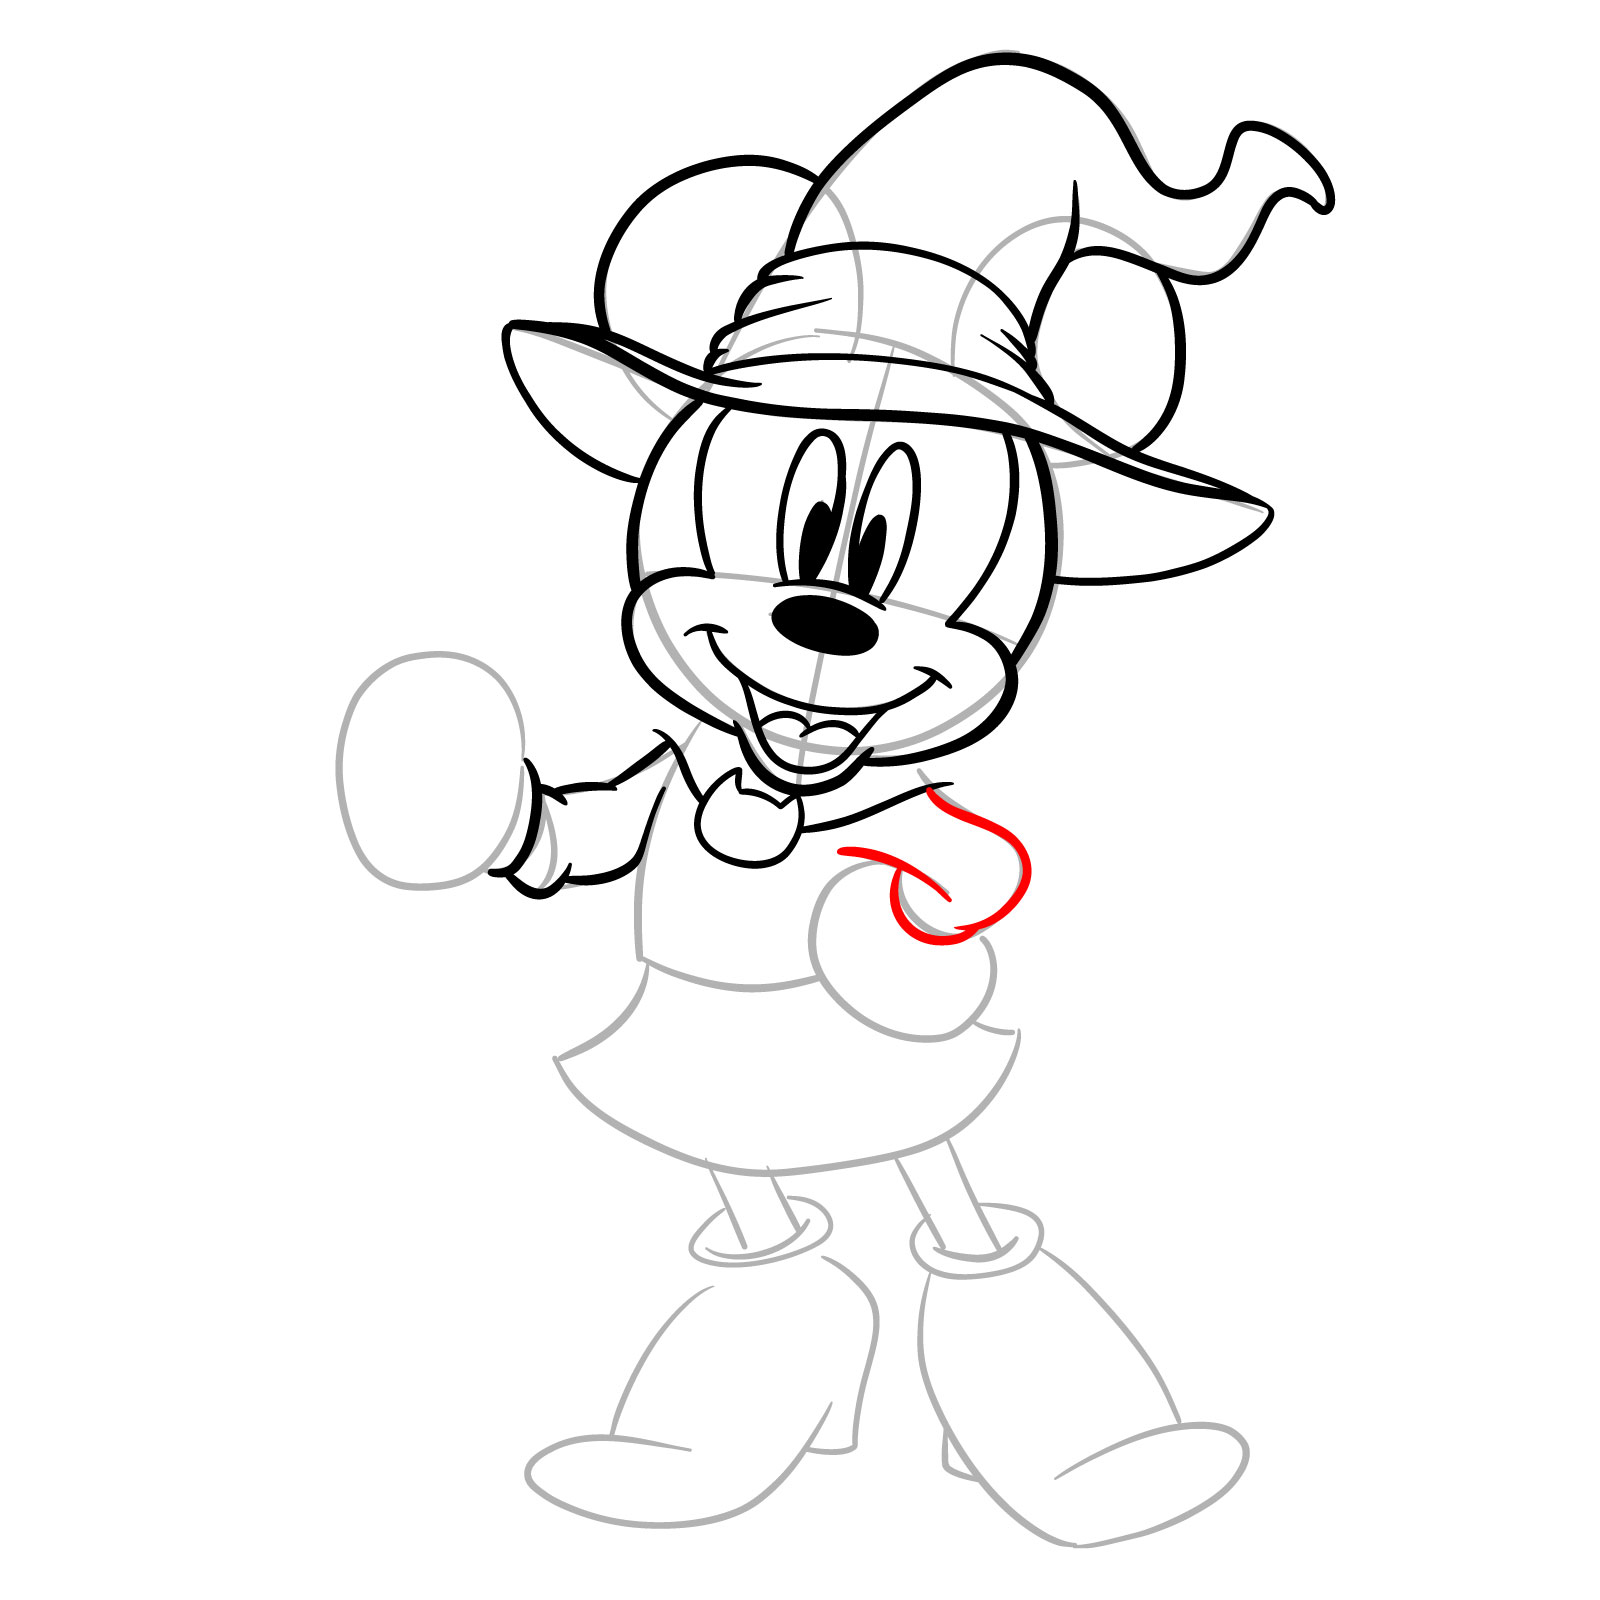 How to draw Halloween Minnie Mouse as a witch - step 15